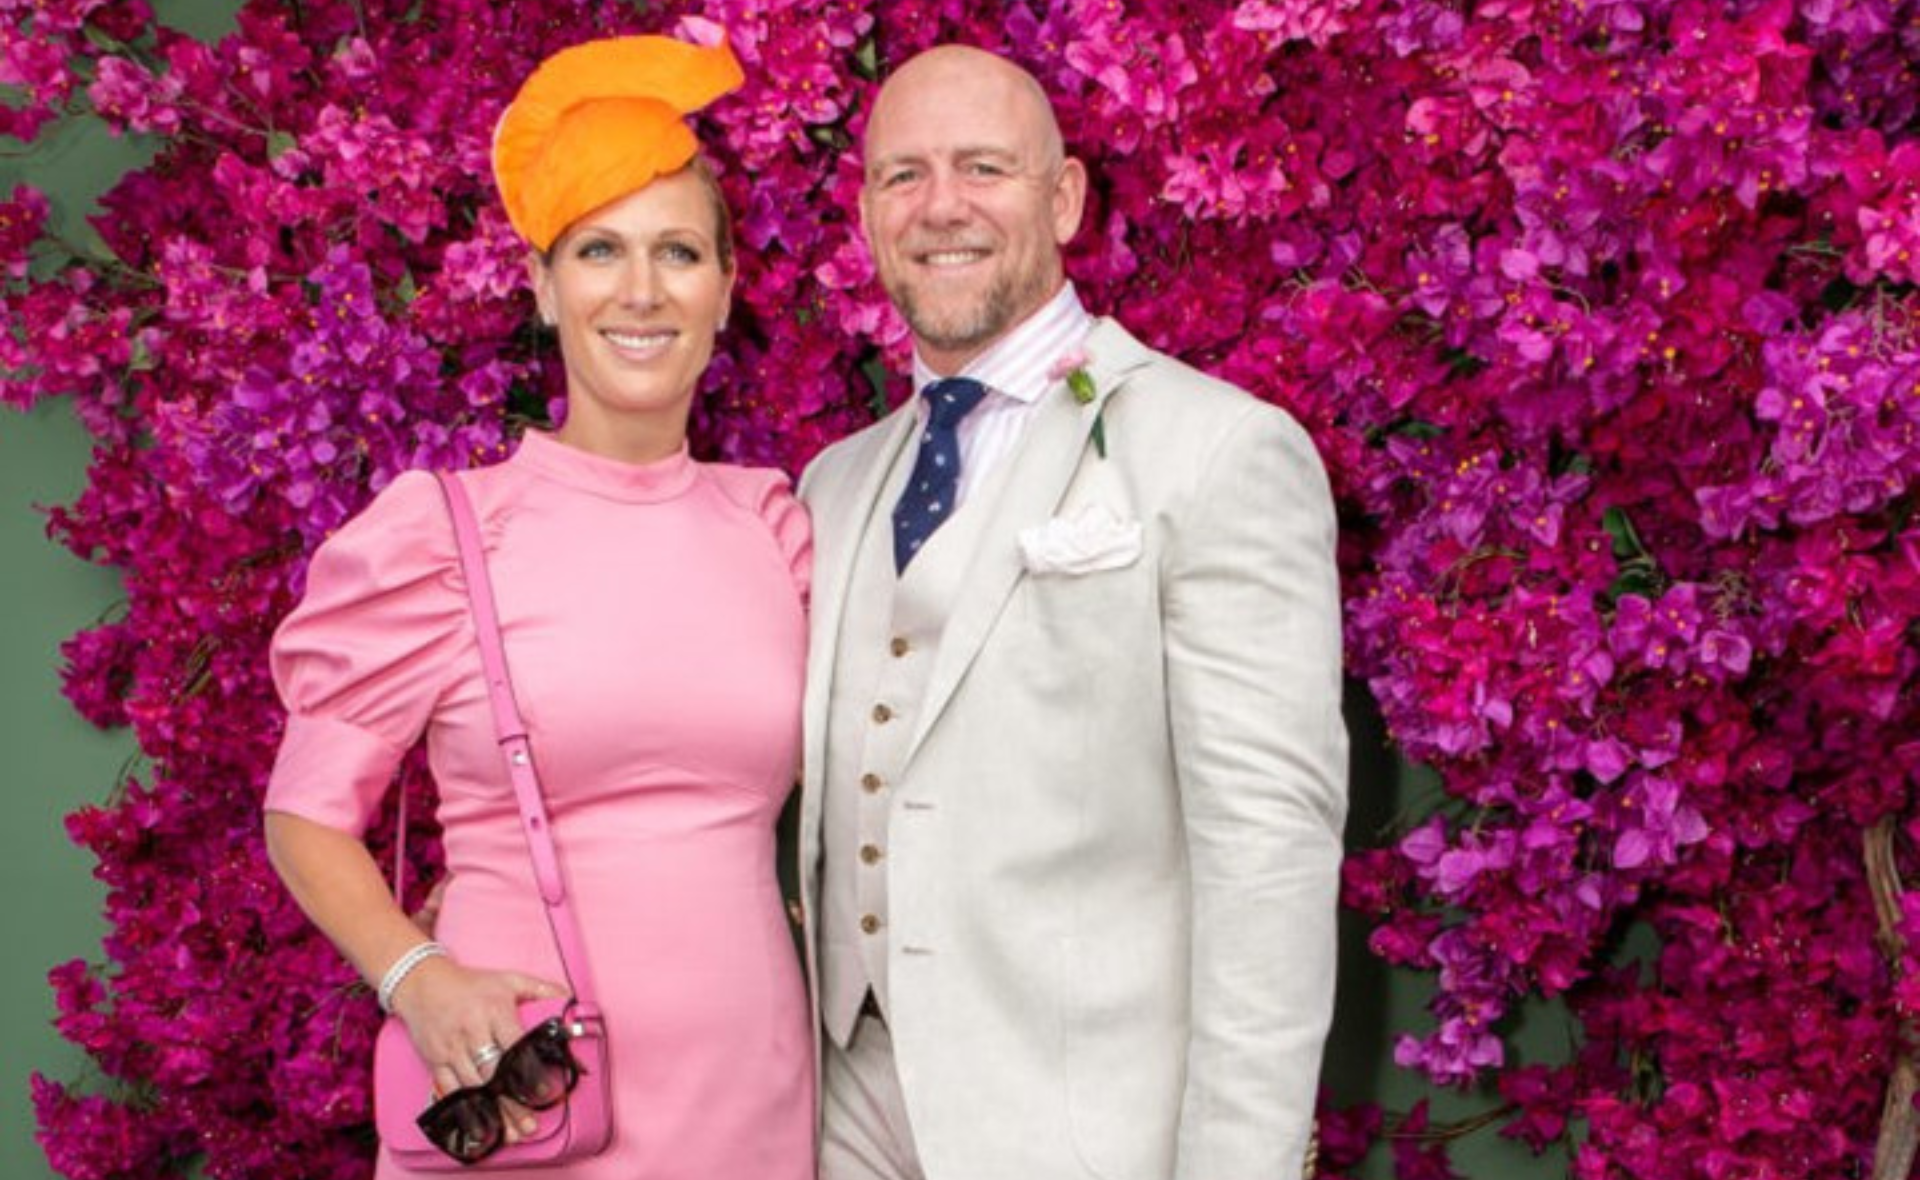 Are Mike and Zara Tindall planning a move down under?